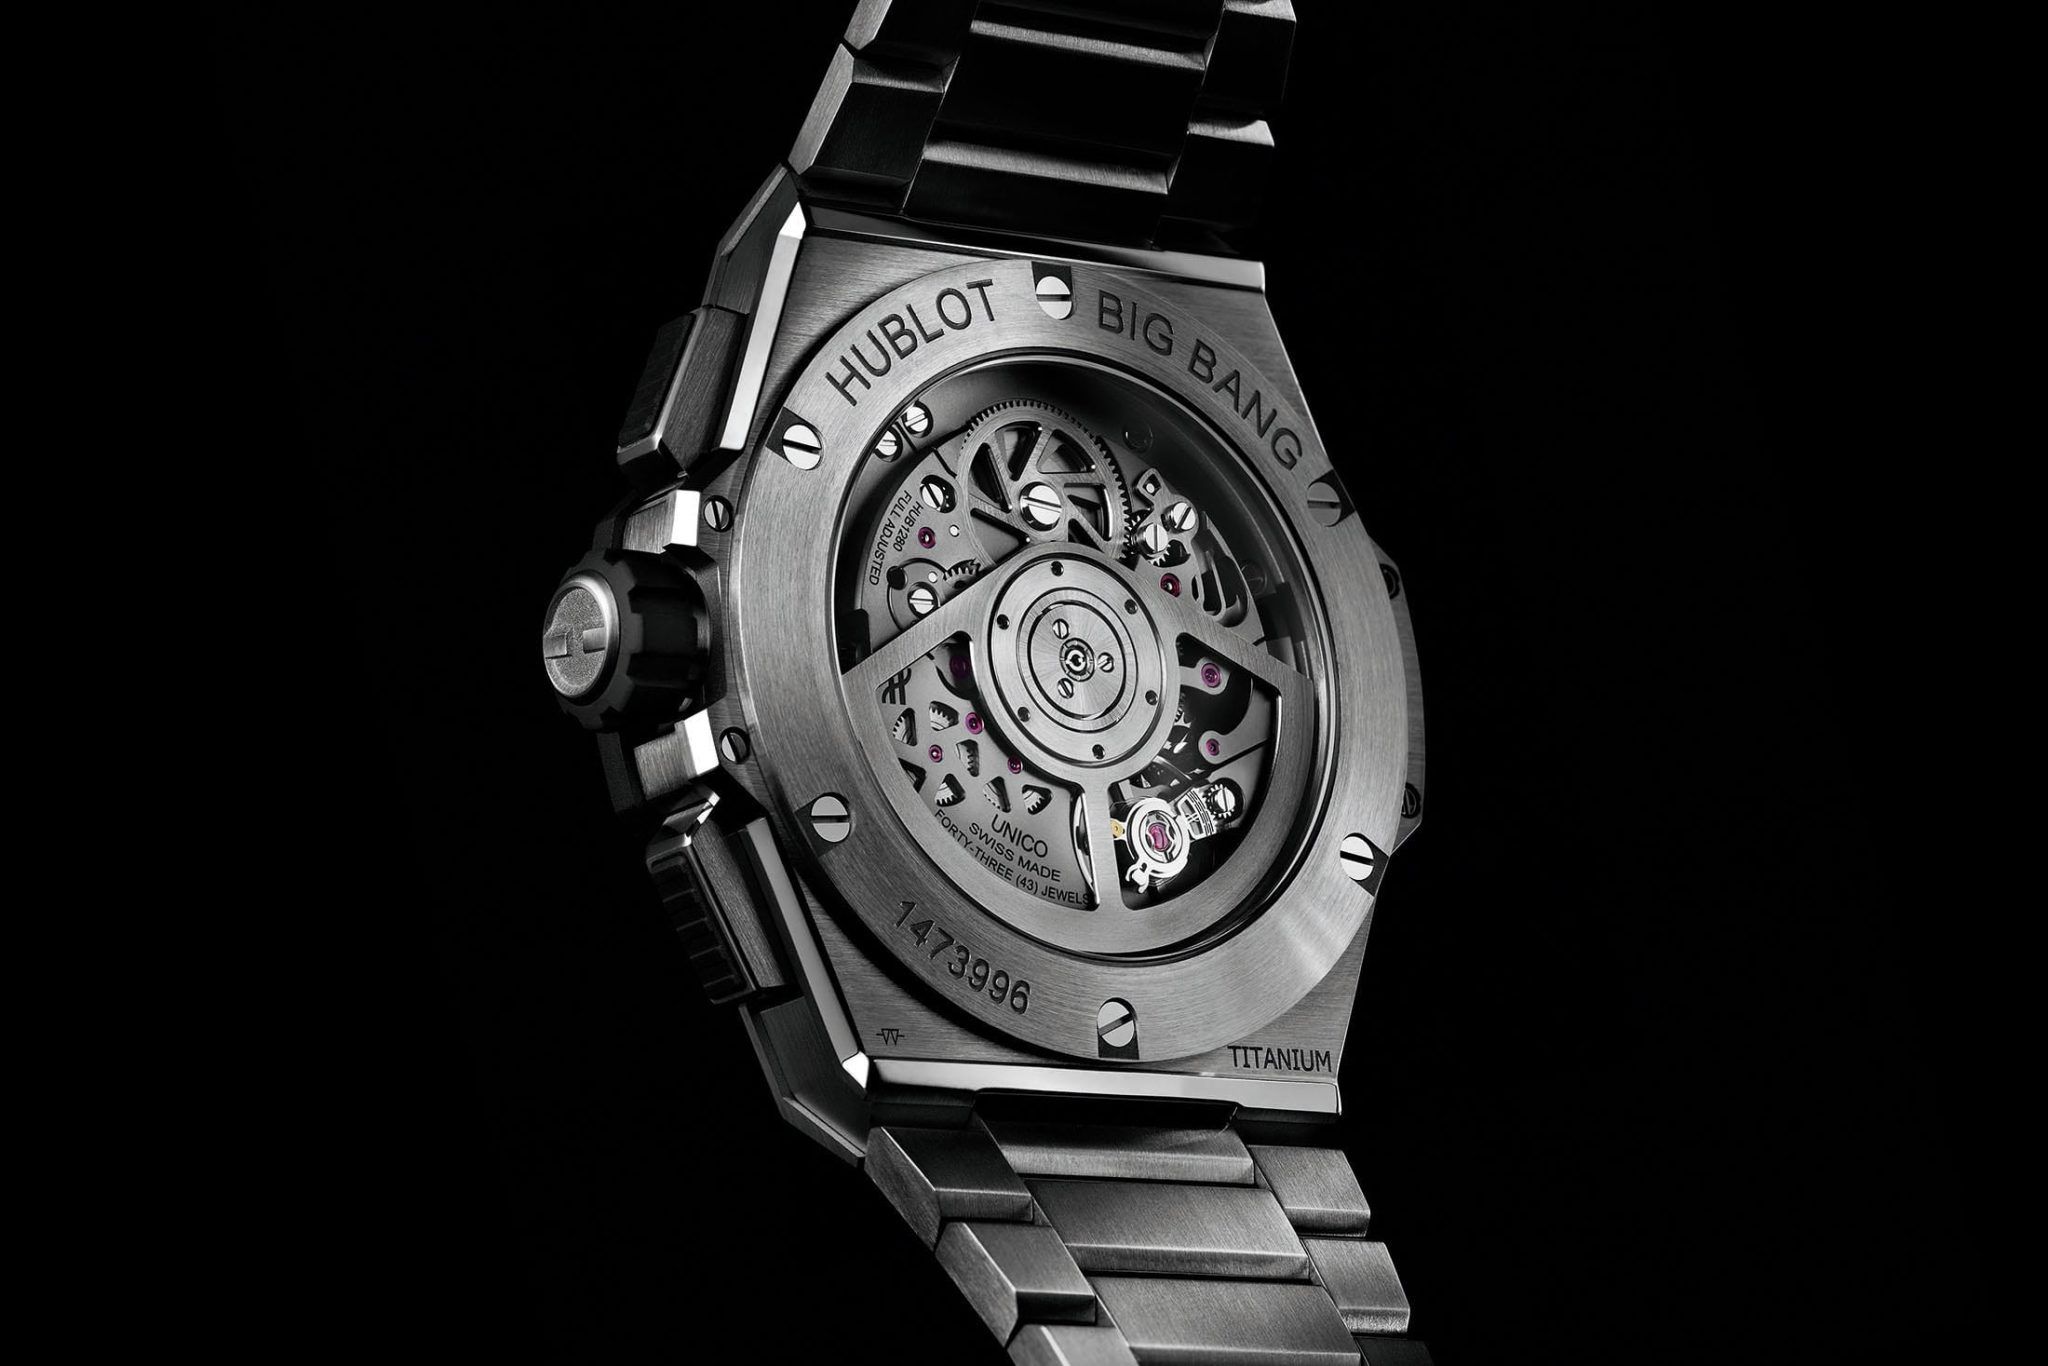 Hublot to Bvlgari, these are the best new watches currently on our radar